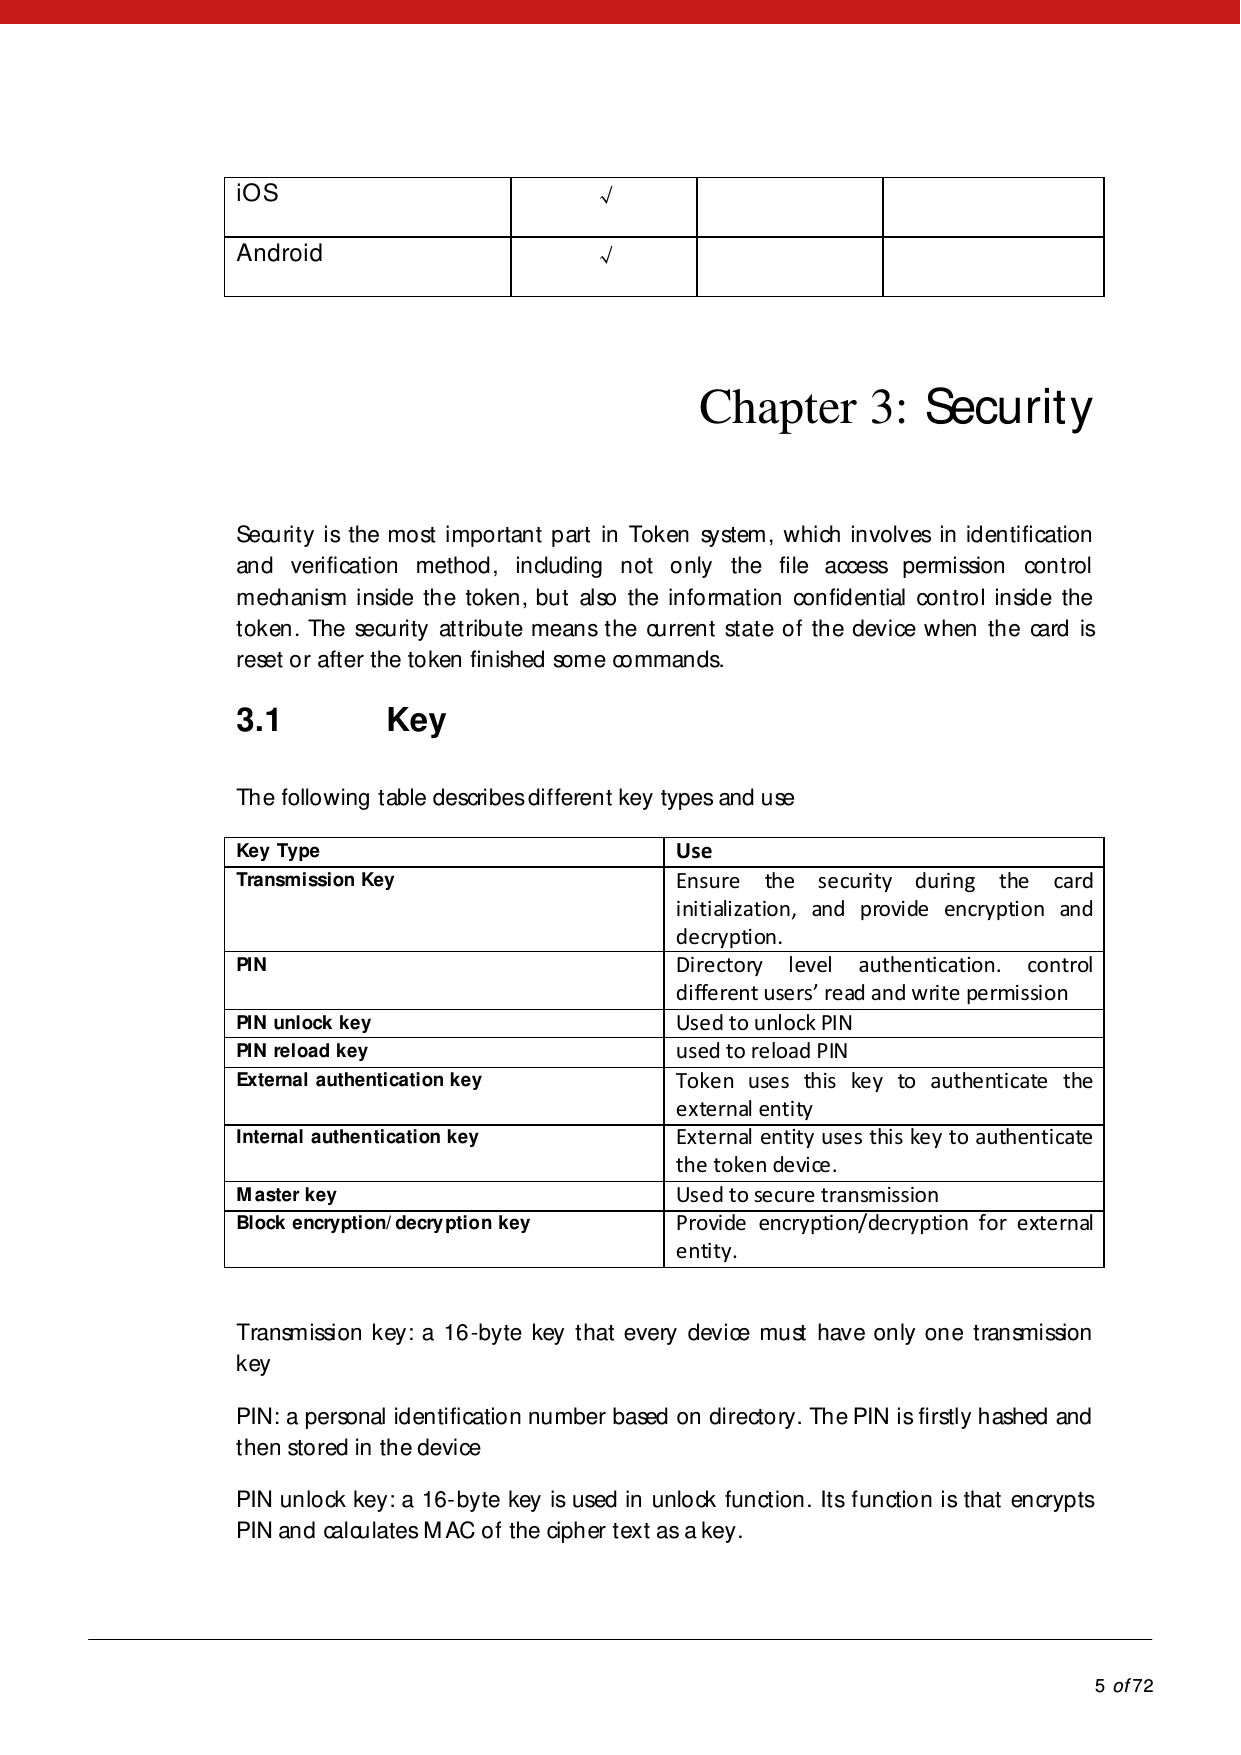            5 of 72  iOS √    Android √     Chapter 3: Security Security is the most important part in Token system, which involves in identification and verification method, including not only the file access permission control mechanism inside the token, but also the information confidential control inside the token. The security attribute means the current state of the device when the card is reset or after the token finished some commands.  3.1 Key The following table describes different key types and use Key Type Use Transmission KeyEnsure the security during the card initialization, and provide encryption and decryption. PIN  Directory level authentication. control differet users’ read ad write perissio PIN unlock key Used to unlock PIN PIN reload key used to reload PIN External authentication key Token uses this key to authenticate the exte rnal enti ty Internal authentication key External entity uses this key to authenticate the token device. M aster key Used to secure transmission Block encryption/ decry ption key Provide encryption/decryption for exte rnal enti ty.  Transmission key: a 16-byte key that every device must have only one transmission key PIN: a personal identification number based on directory. The PIN is firstly hashed and then stored in the device   PIN unlock key: a 16-byte key is used in unlock function. Its function is that encrypts PIN and calculates M AC of the cipher text as a key.   